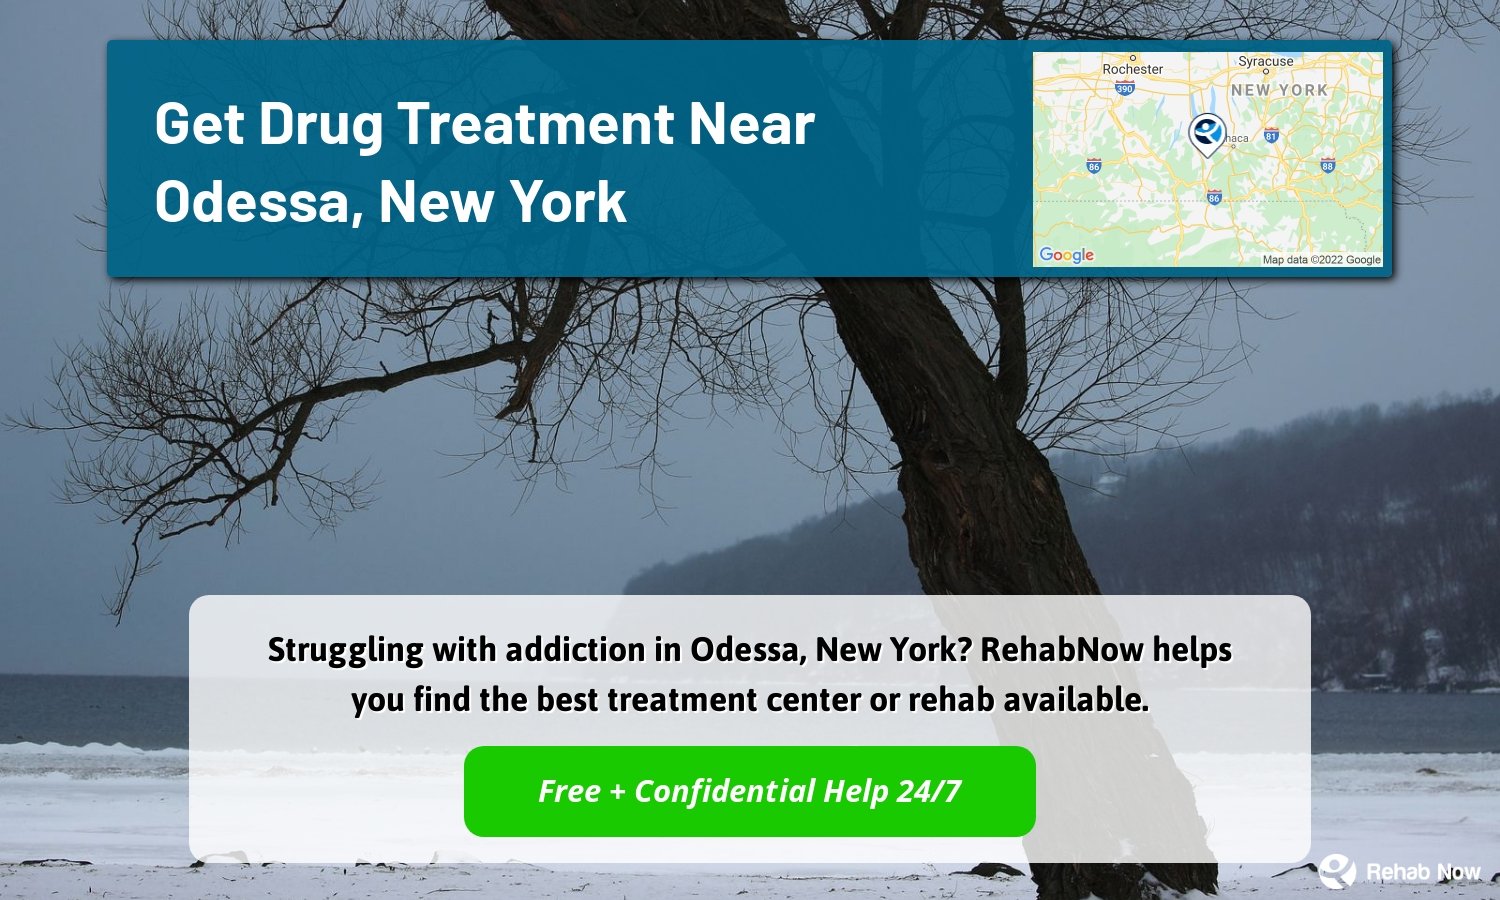 Struggling with addiction in Odessa, New York? RehabNow helps you find the best treatment center or rehab available.